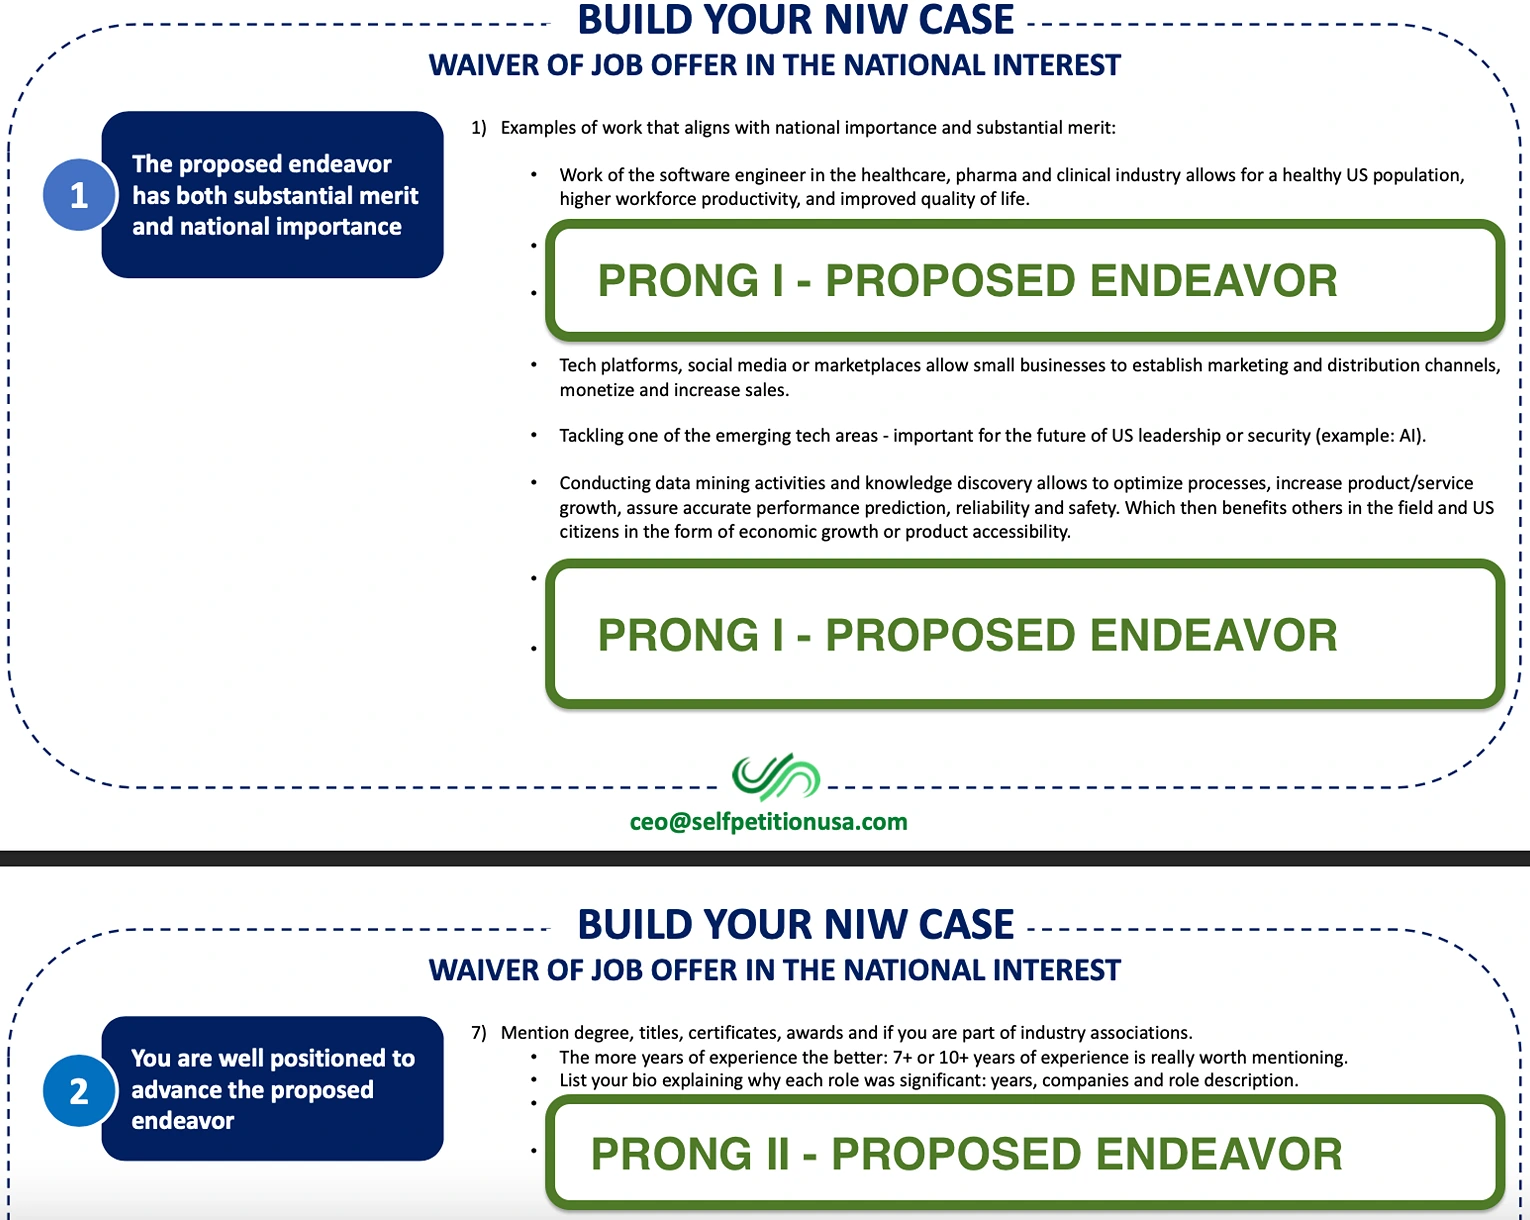 Fast Track Your Green Card Process with EB2 NIW, Did you know that you can  self-petition for your green card without your employer's help?  Researchers, startup founders, engineers, consultants, and a